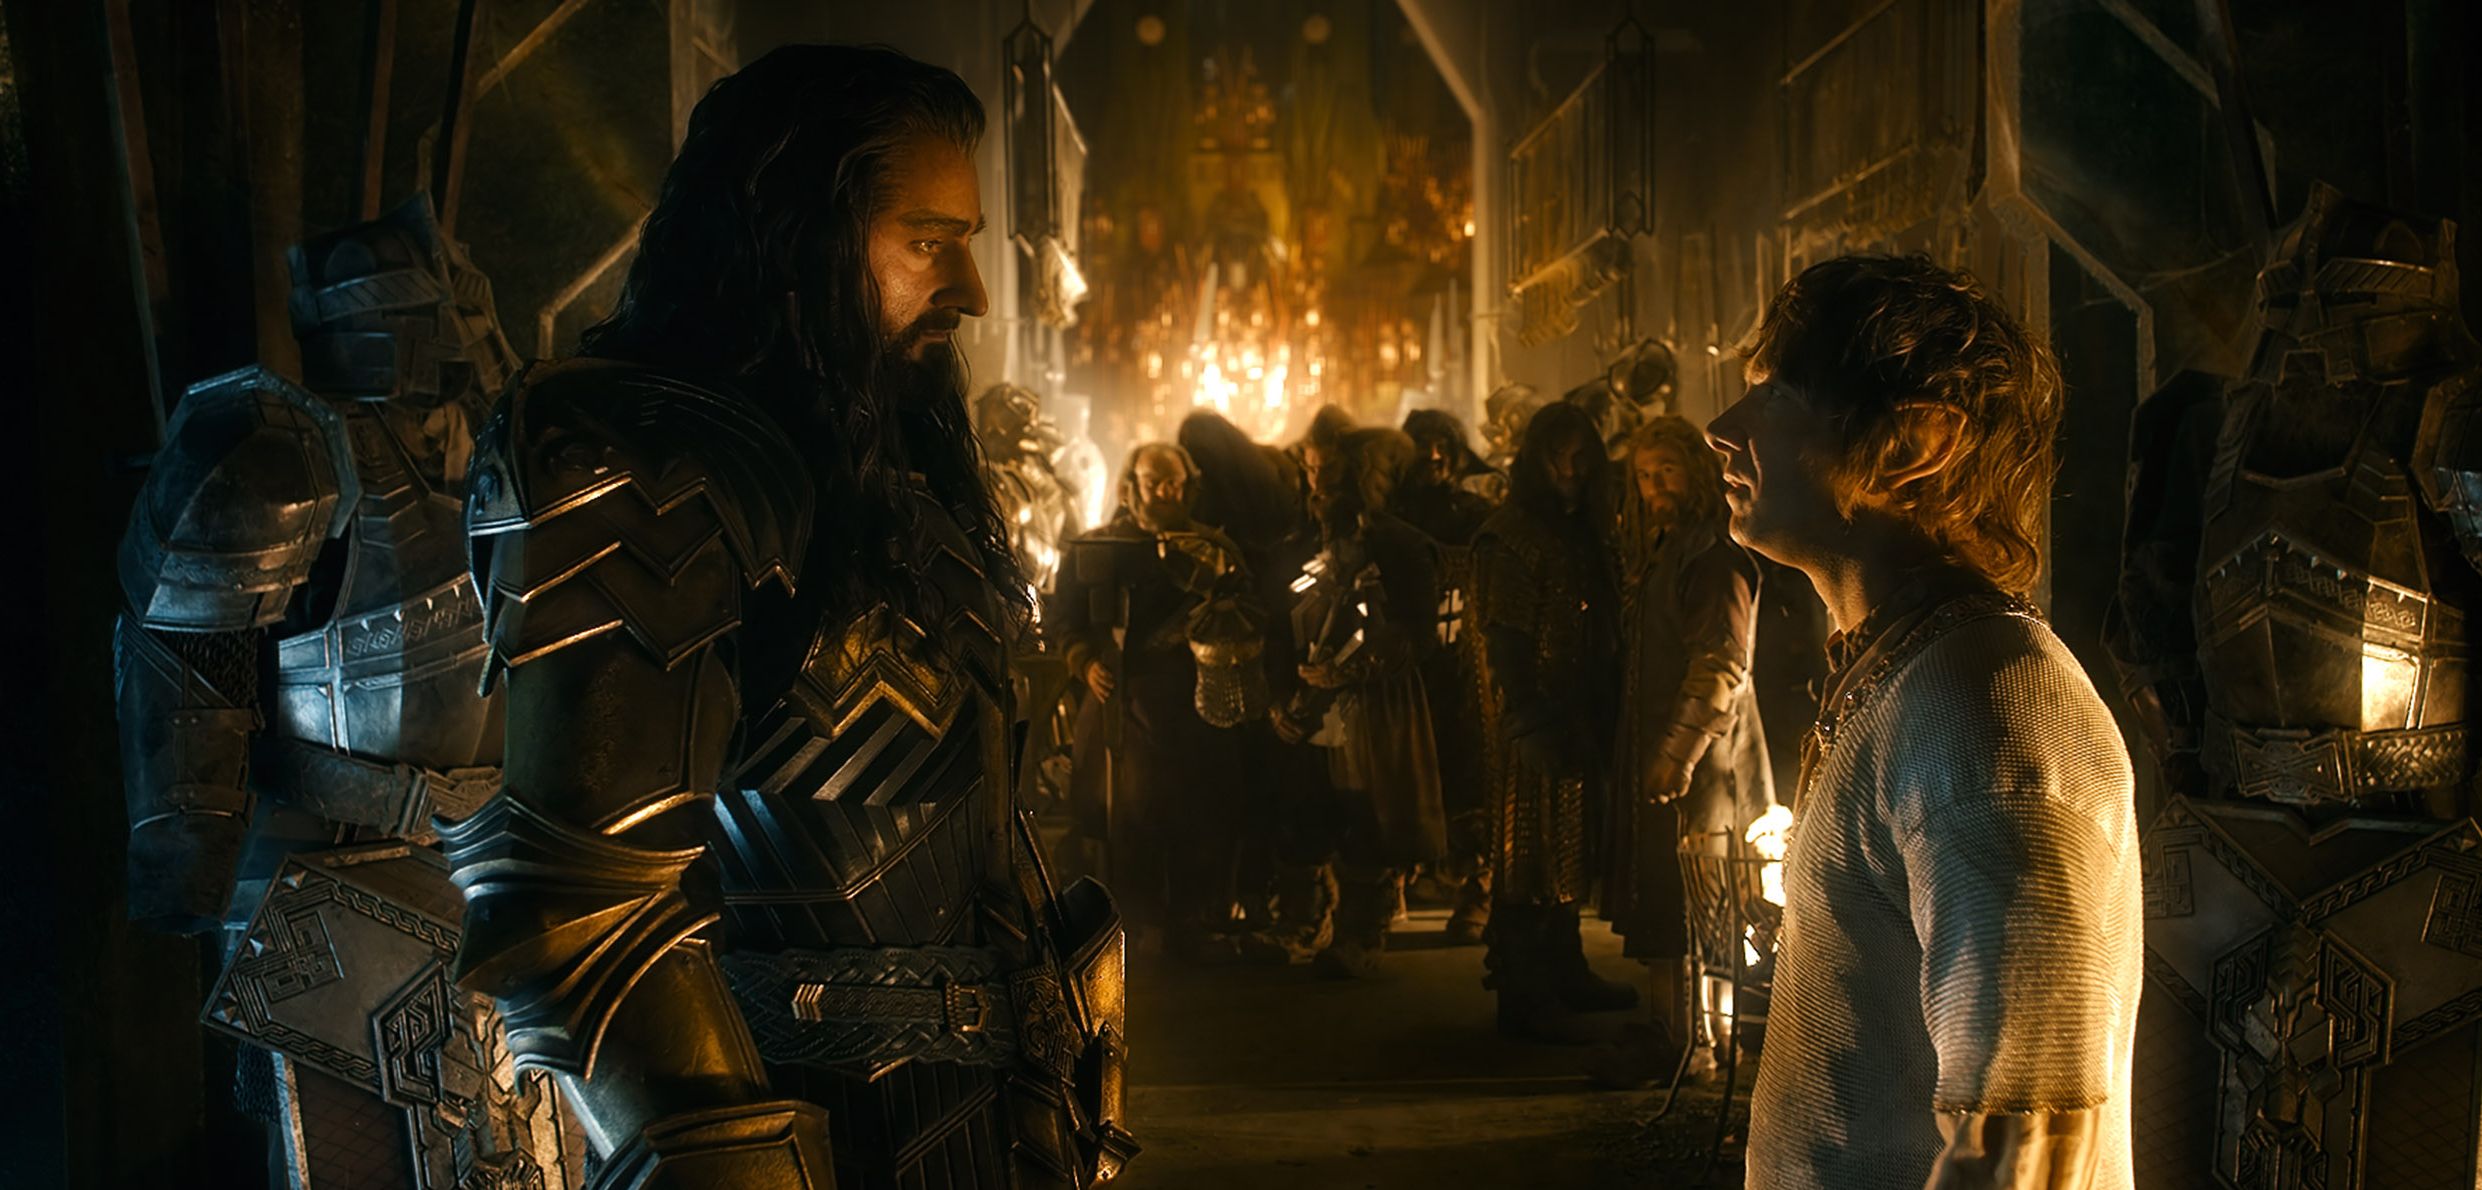 Bilbo Baggins and Thorin Oakenshield have a chat in The Batt